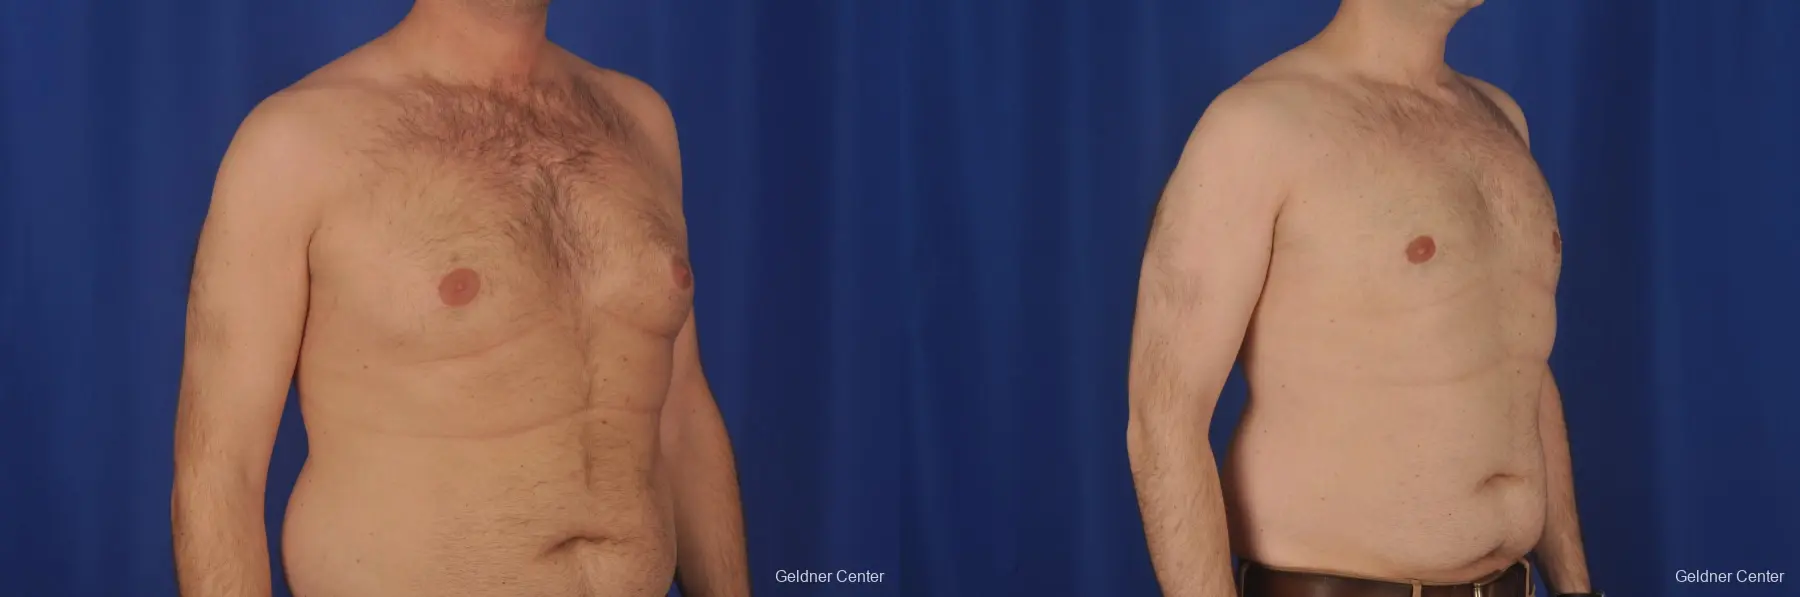 Gynecomastia: Patient 1 - Before and After 3